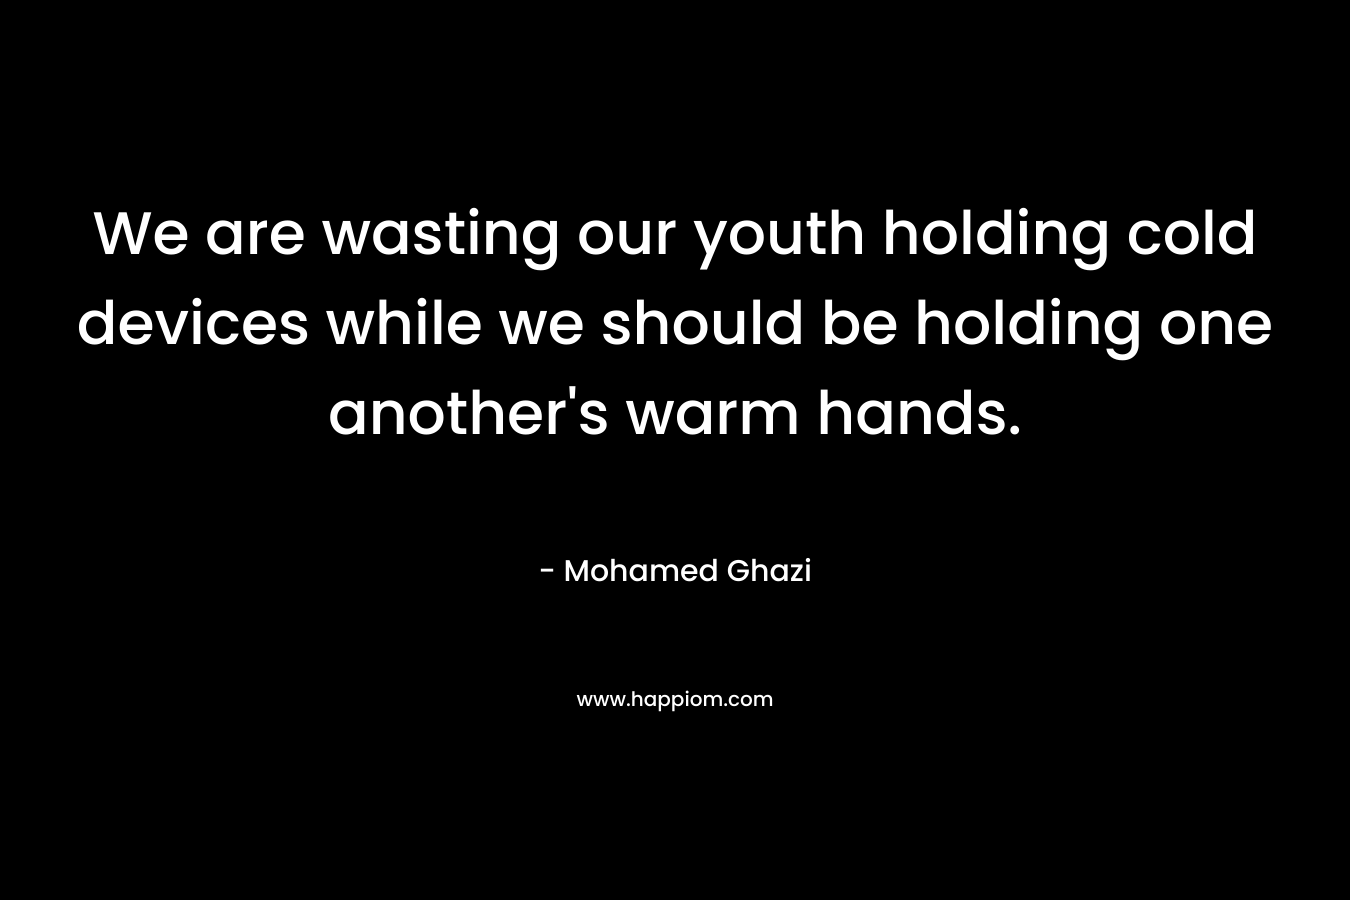 We are wasting our youth holding cold devices while we should be holding one another’s warm hands. – Mohamed Ghazi